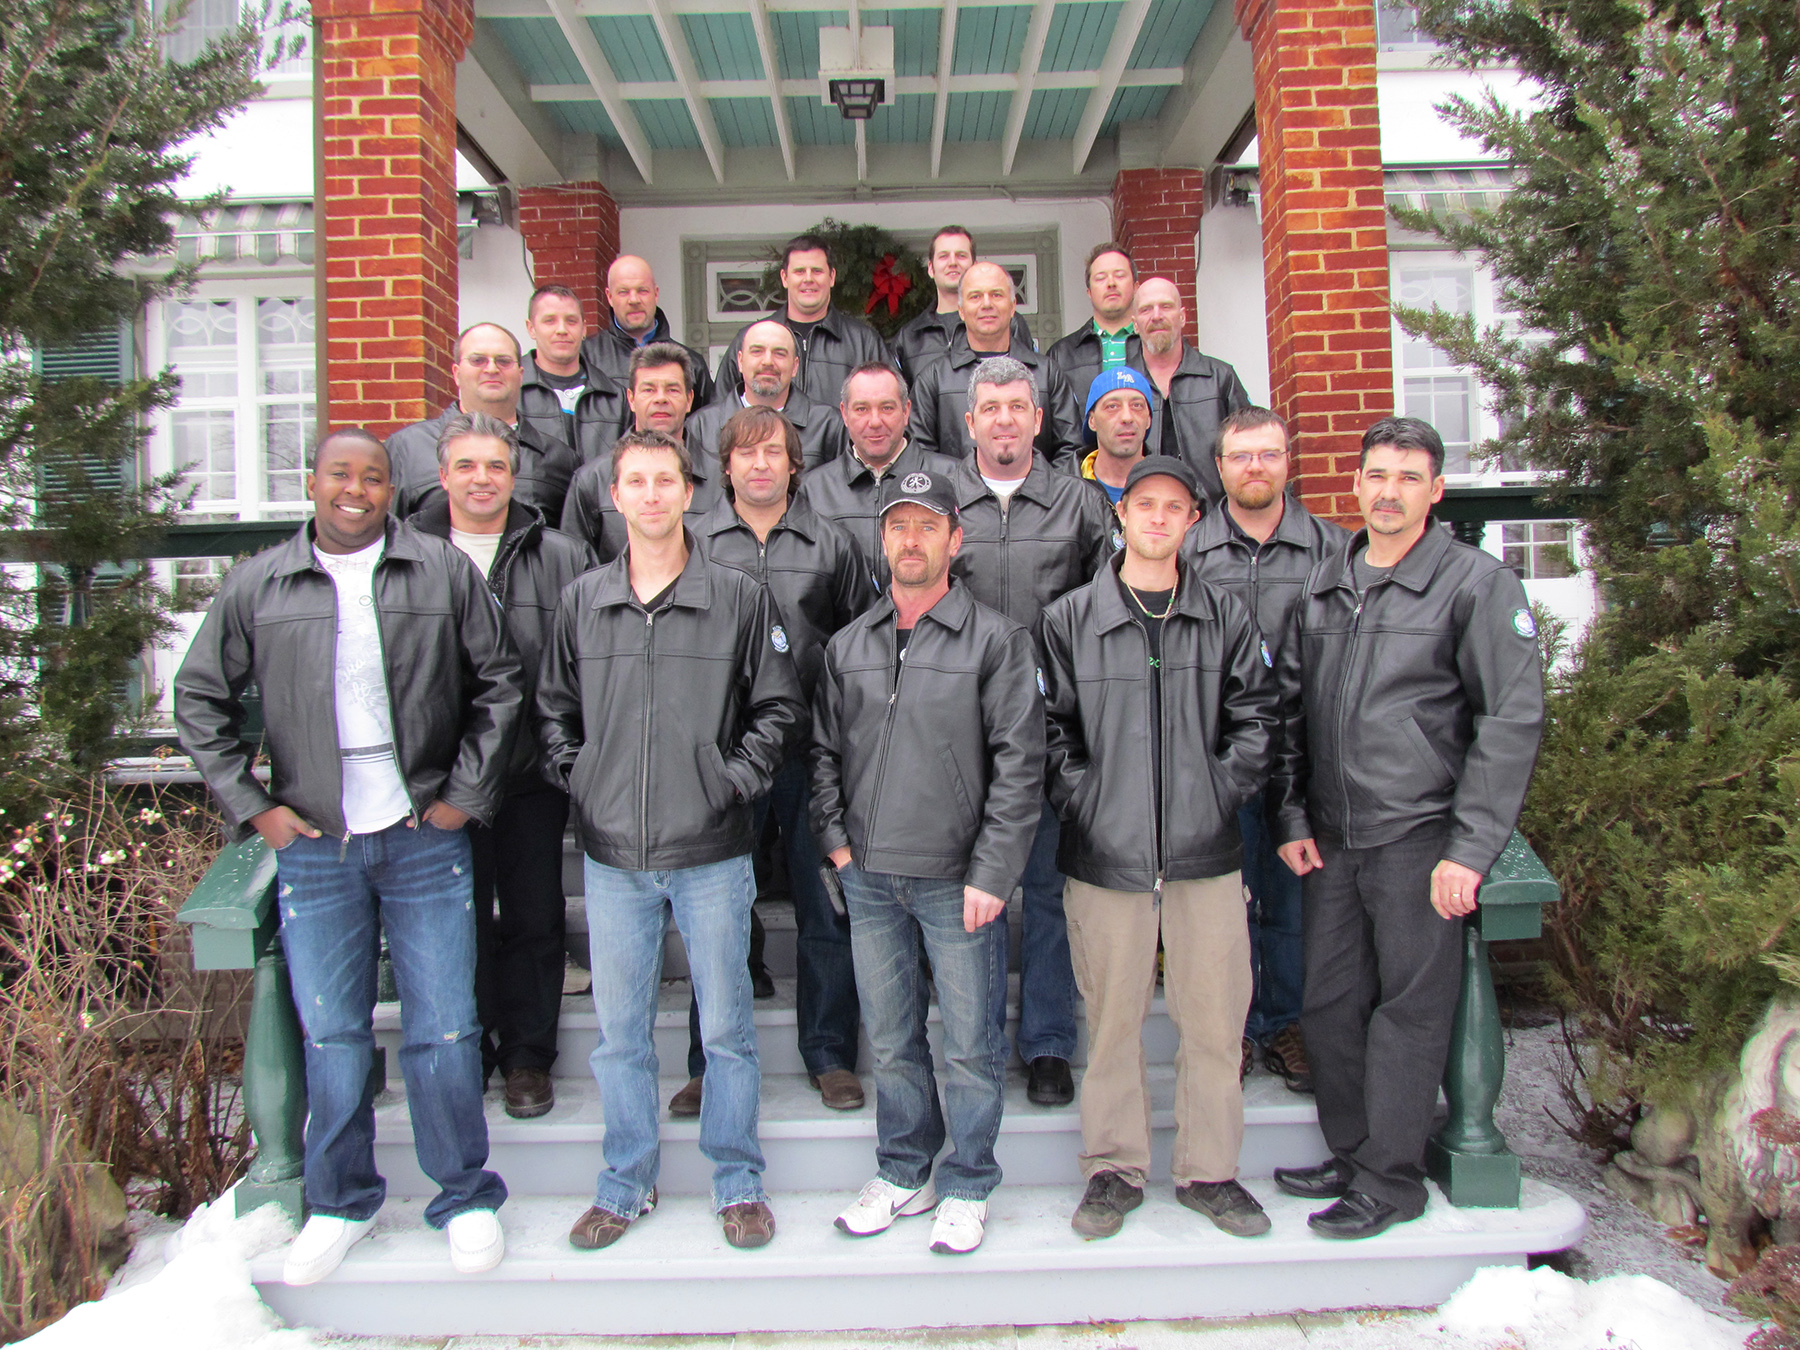 Group image of FUFL 8 attendees